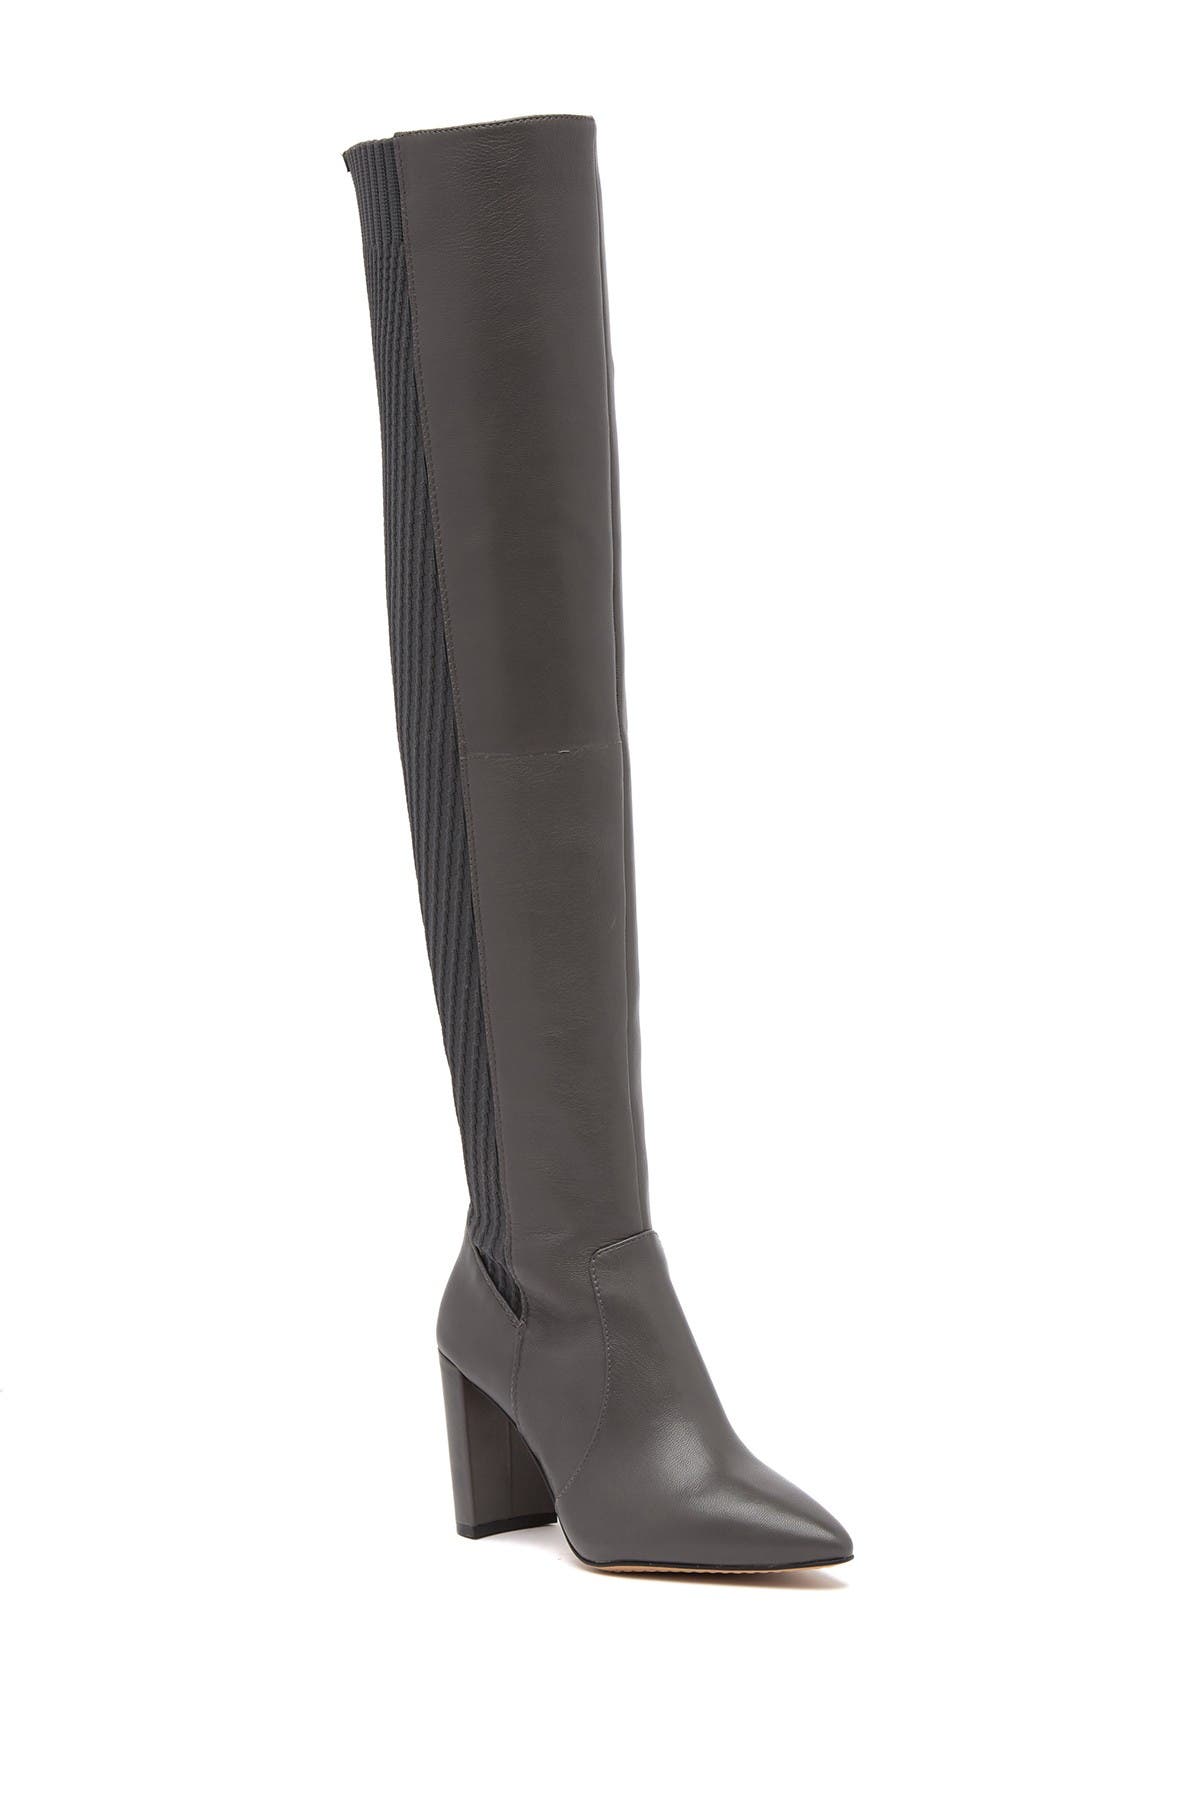 majestie over the knee boot vince camuto